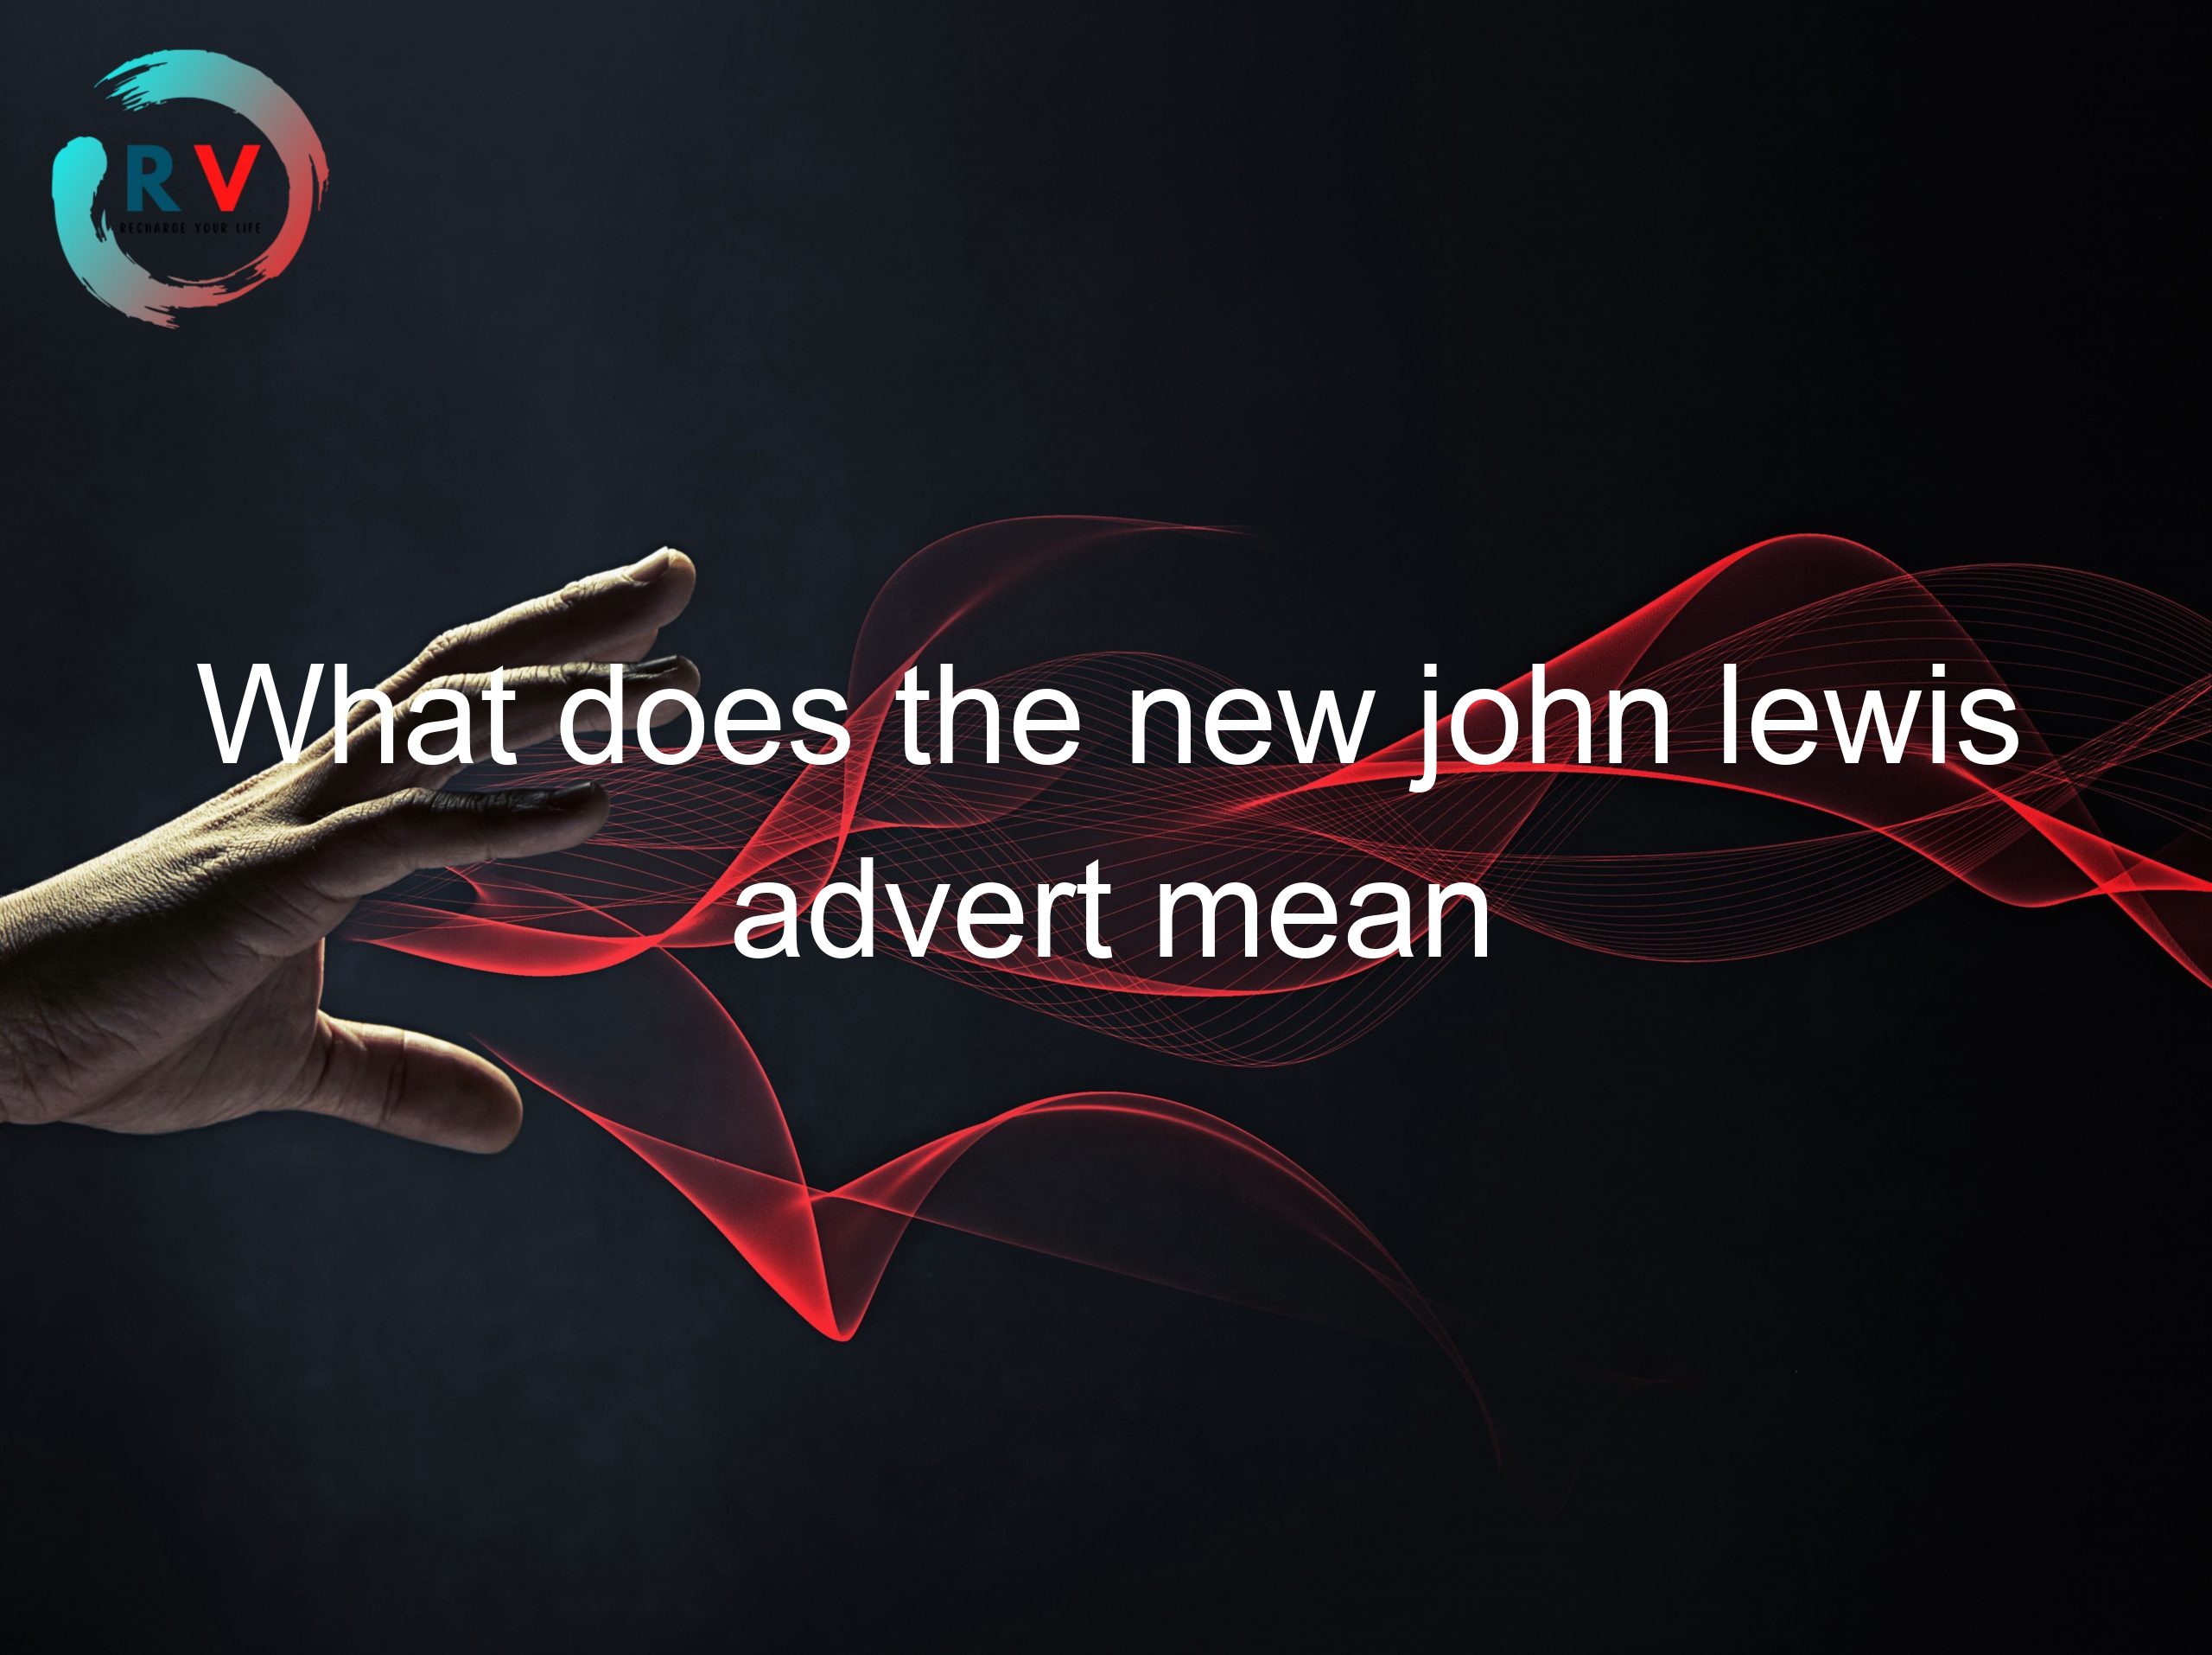 What does the new john lewis advert mean